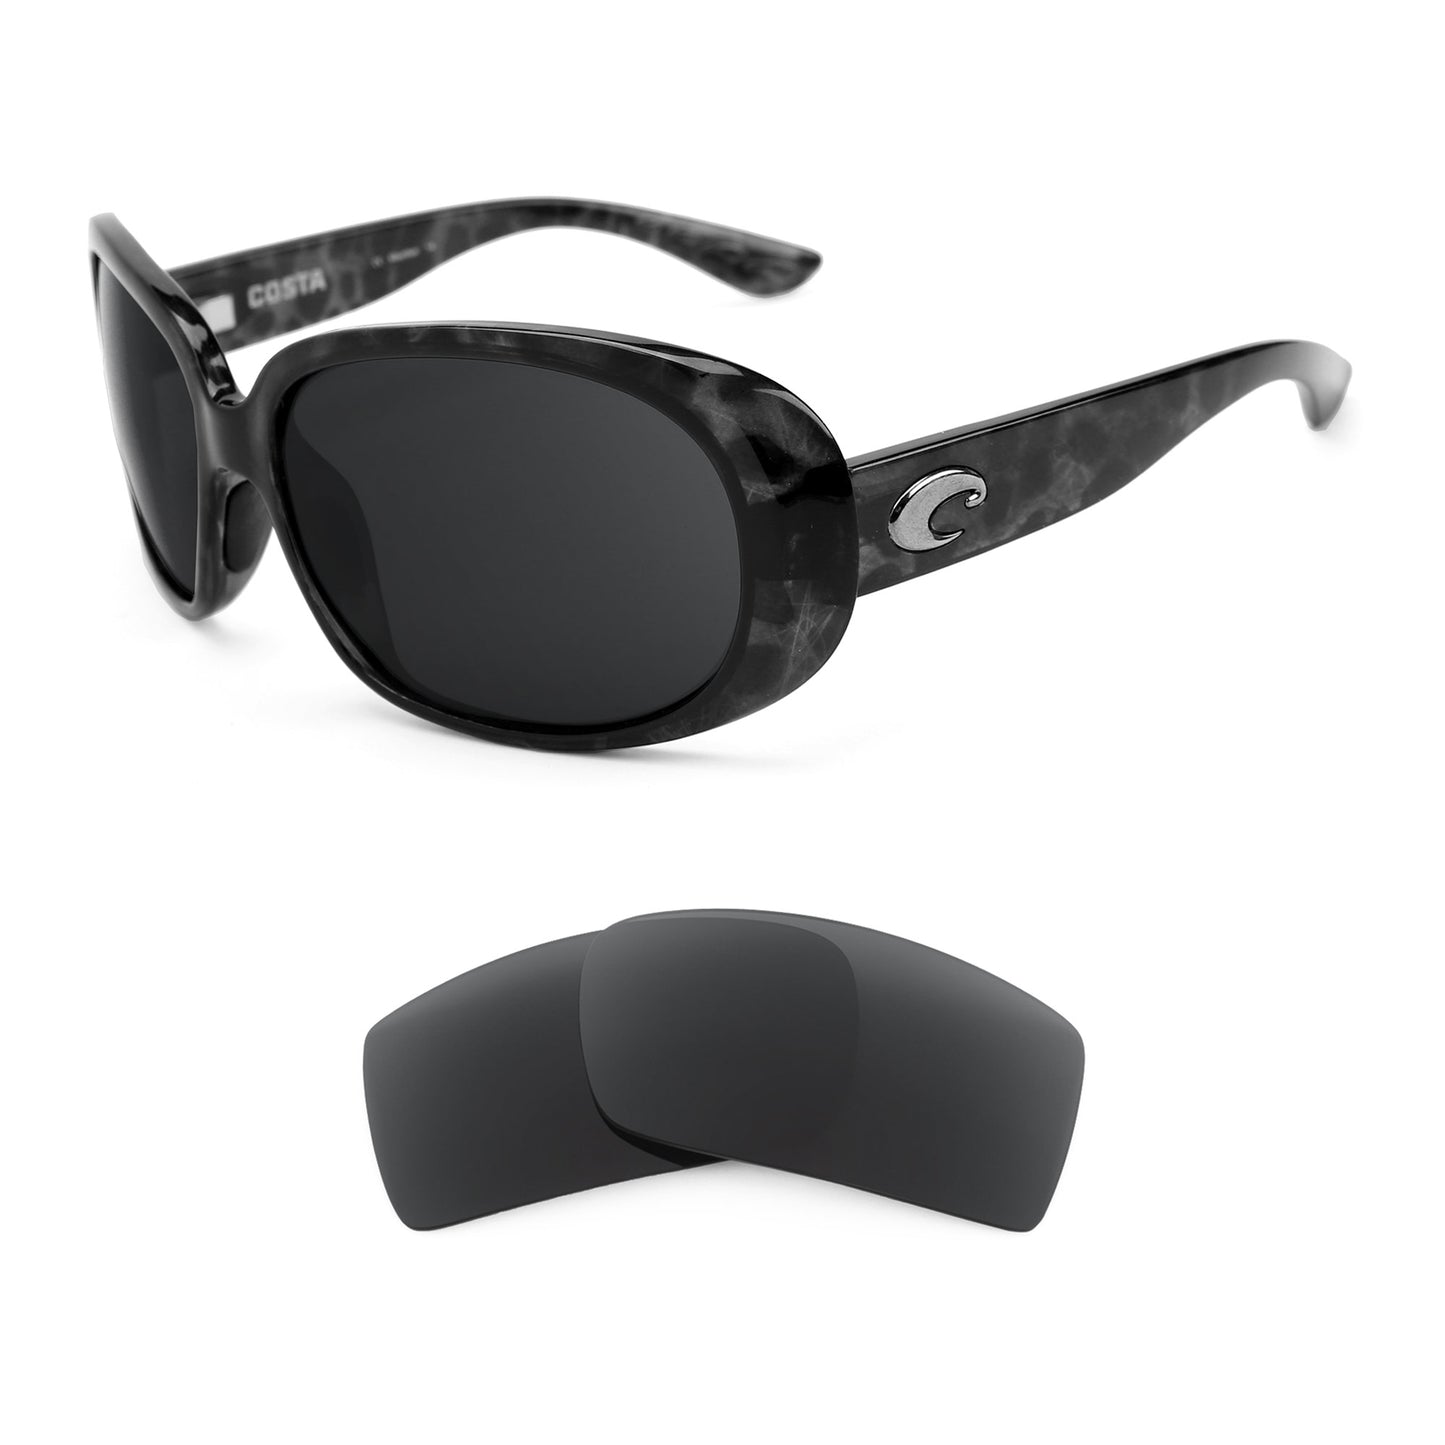 Costa Hammock sunglasses with replacement lenses